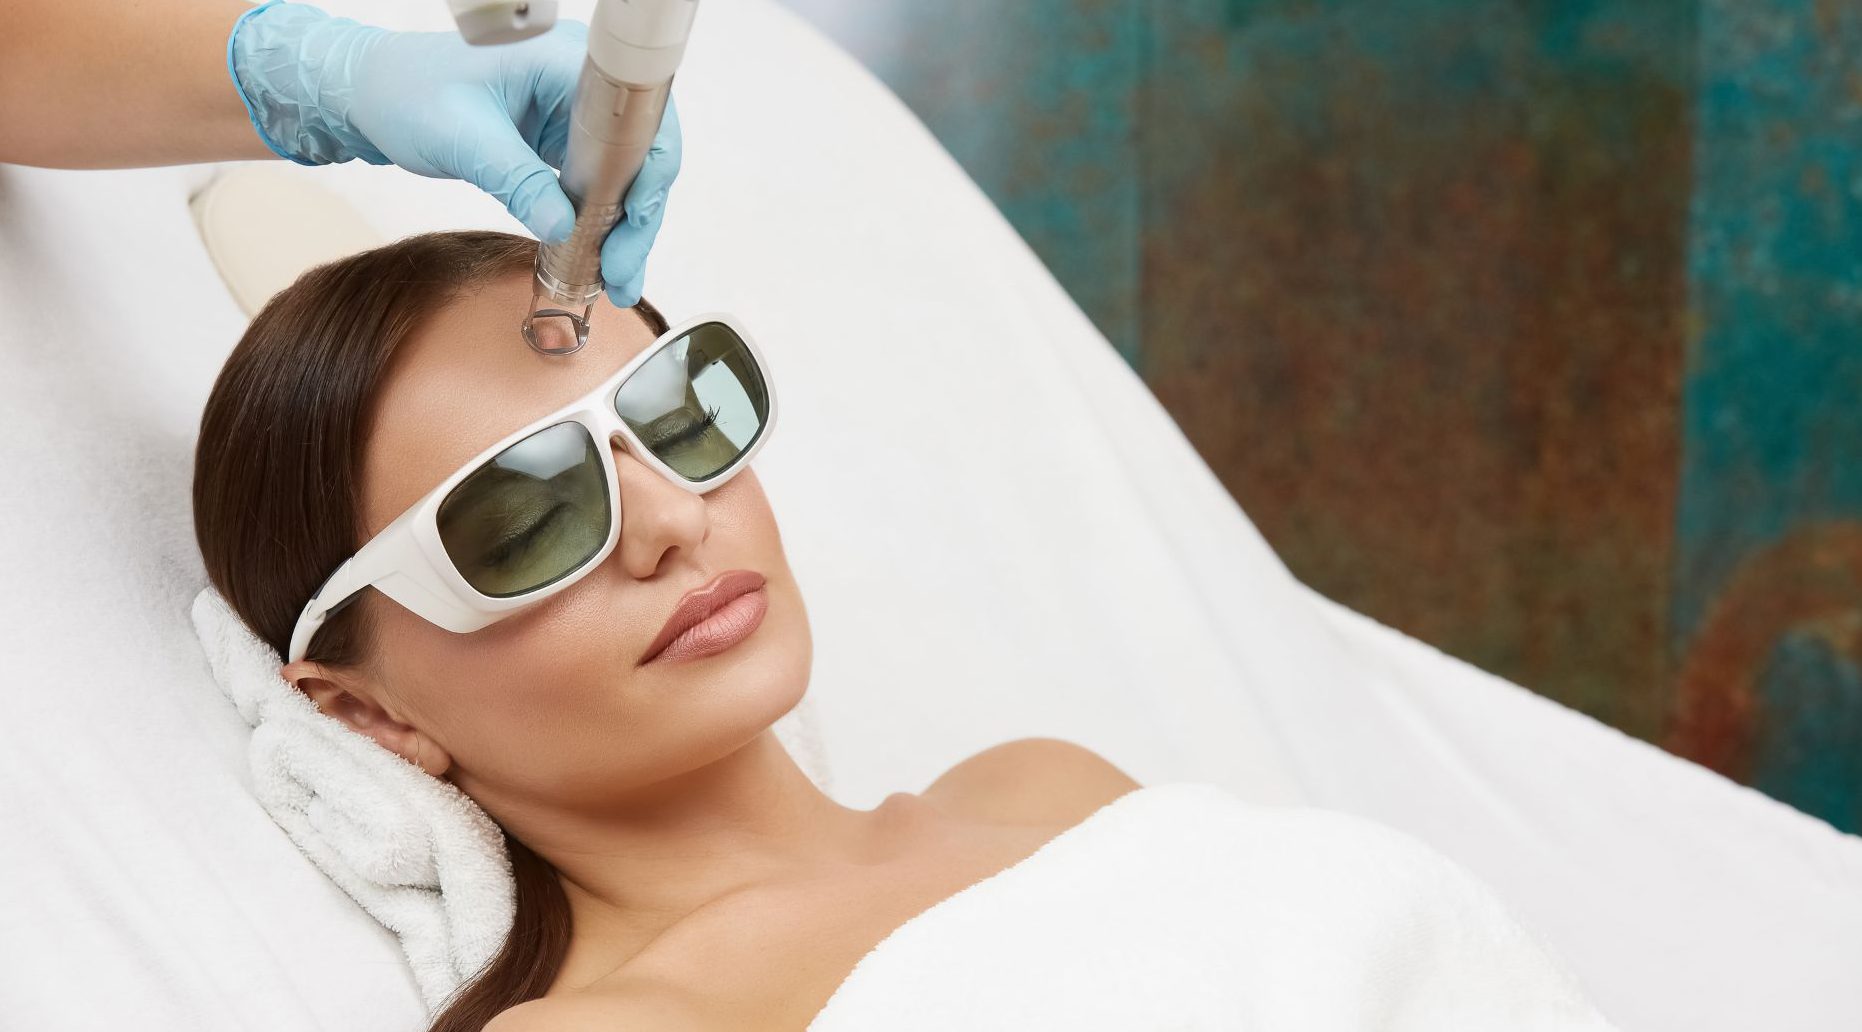 Cosmetic Lasers Market